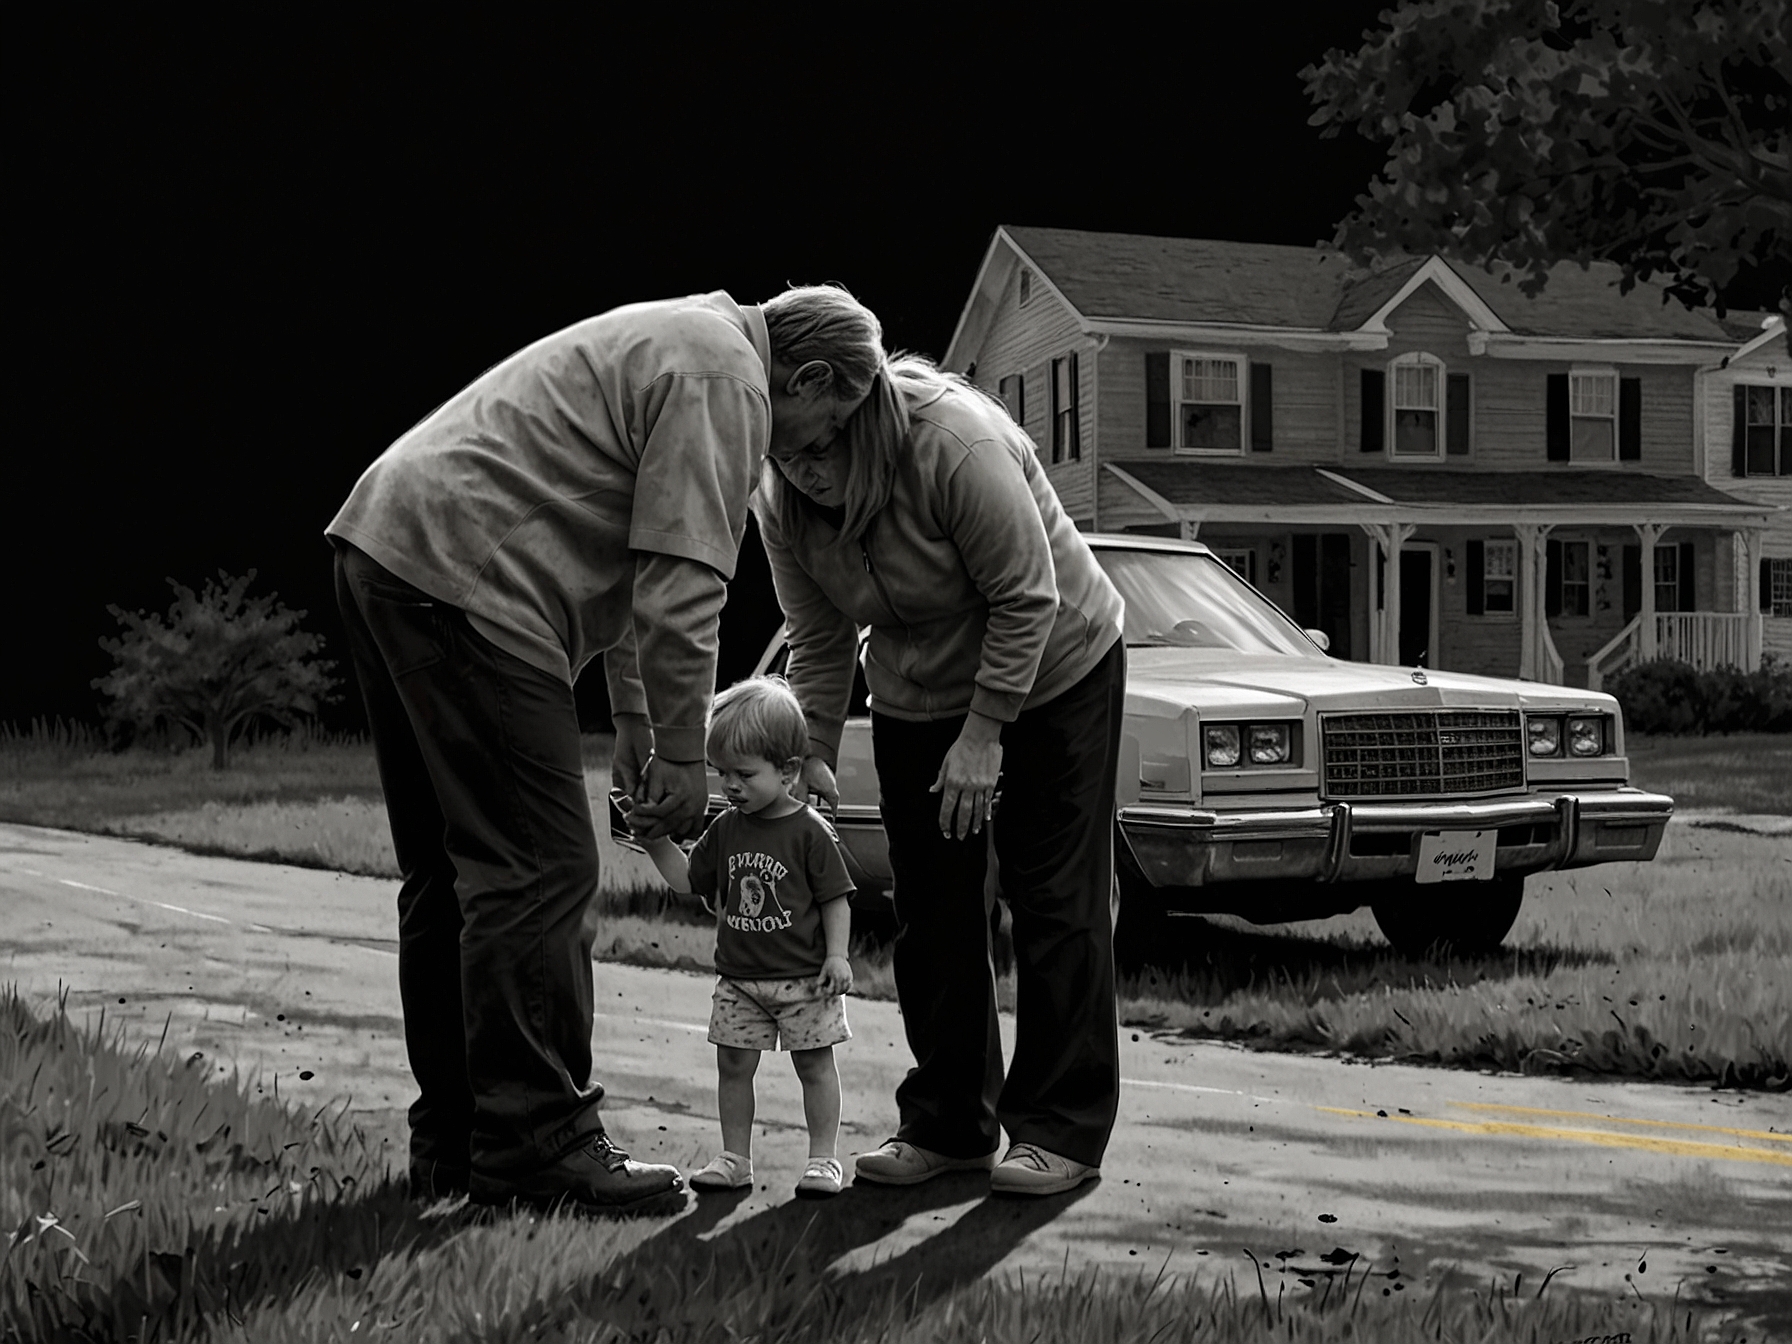 An image of a grieving family in Harford County, Maryland, showing the emotional impact of the tragedy.